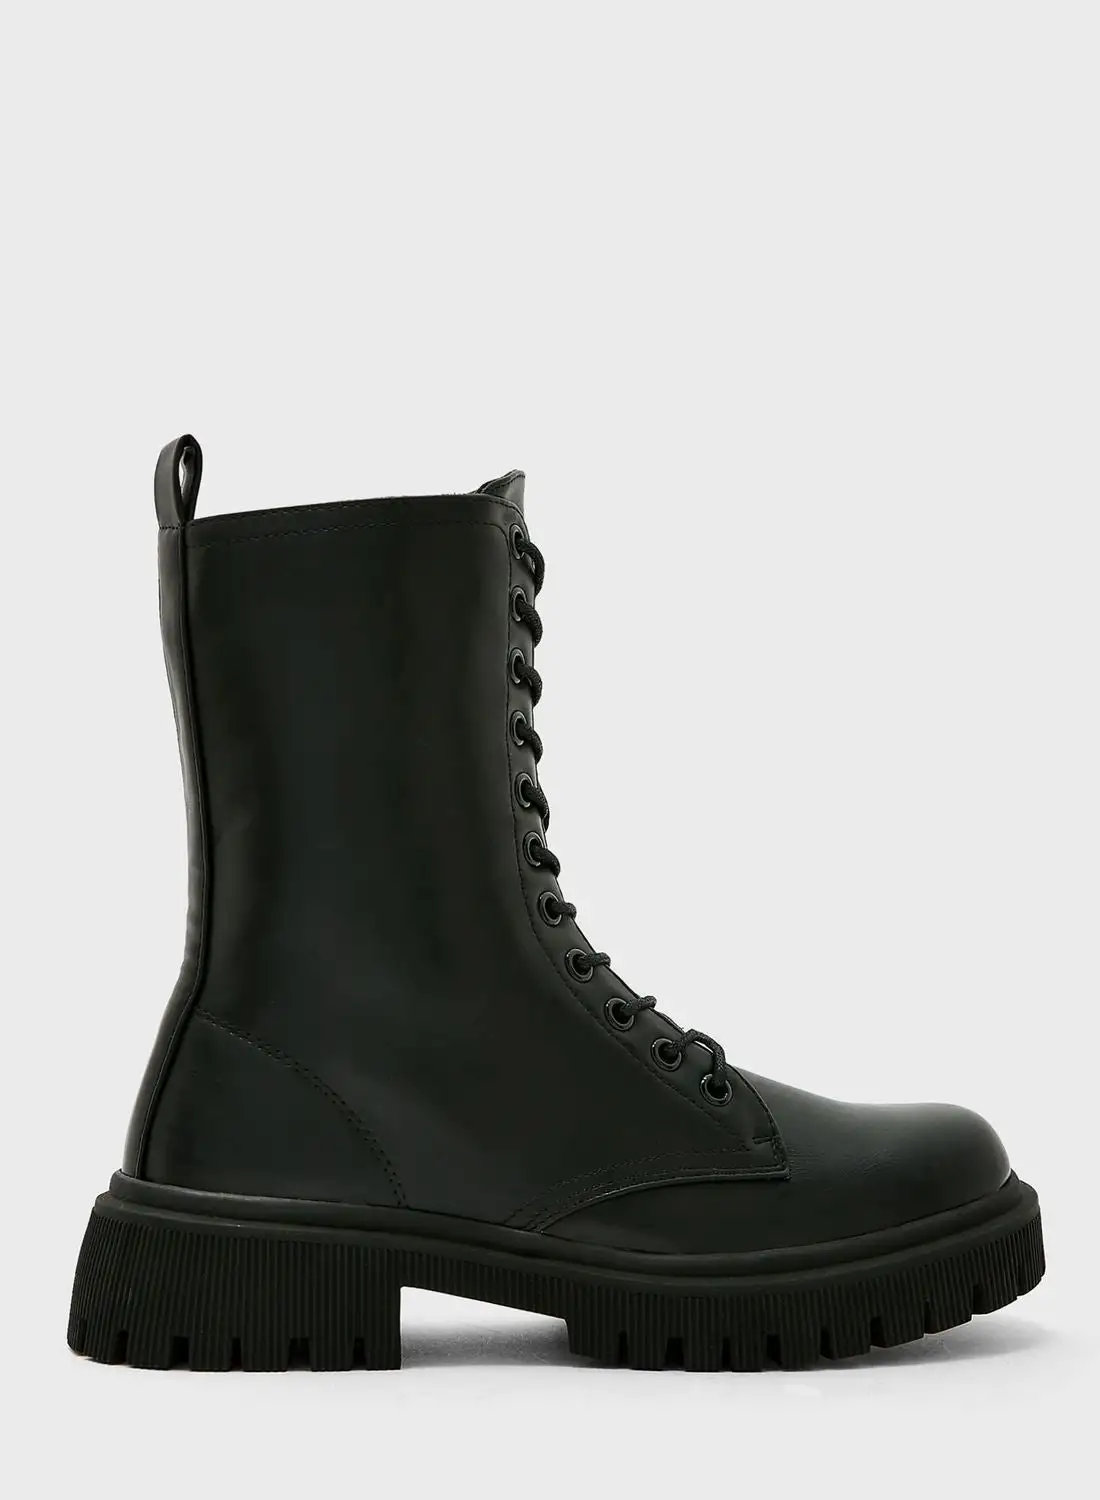 NEW LOOK Lace Up Boots